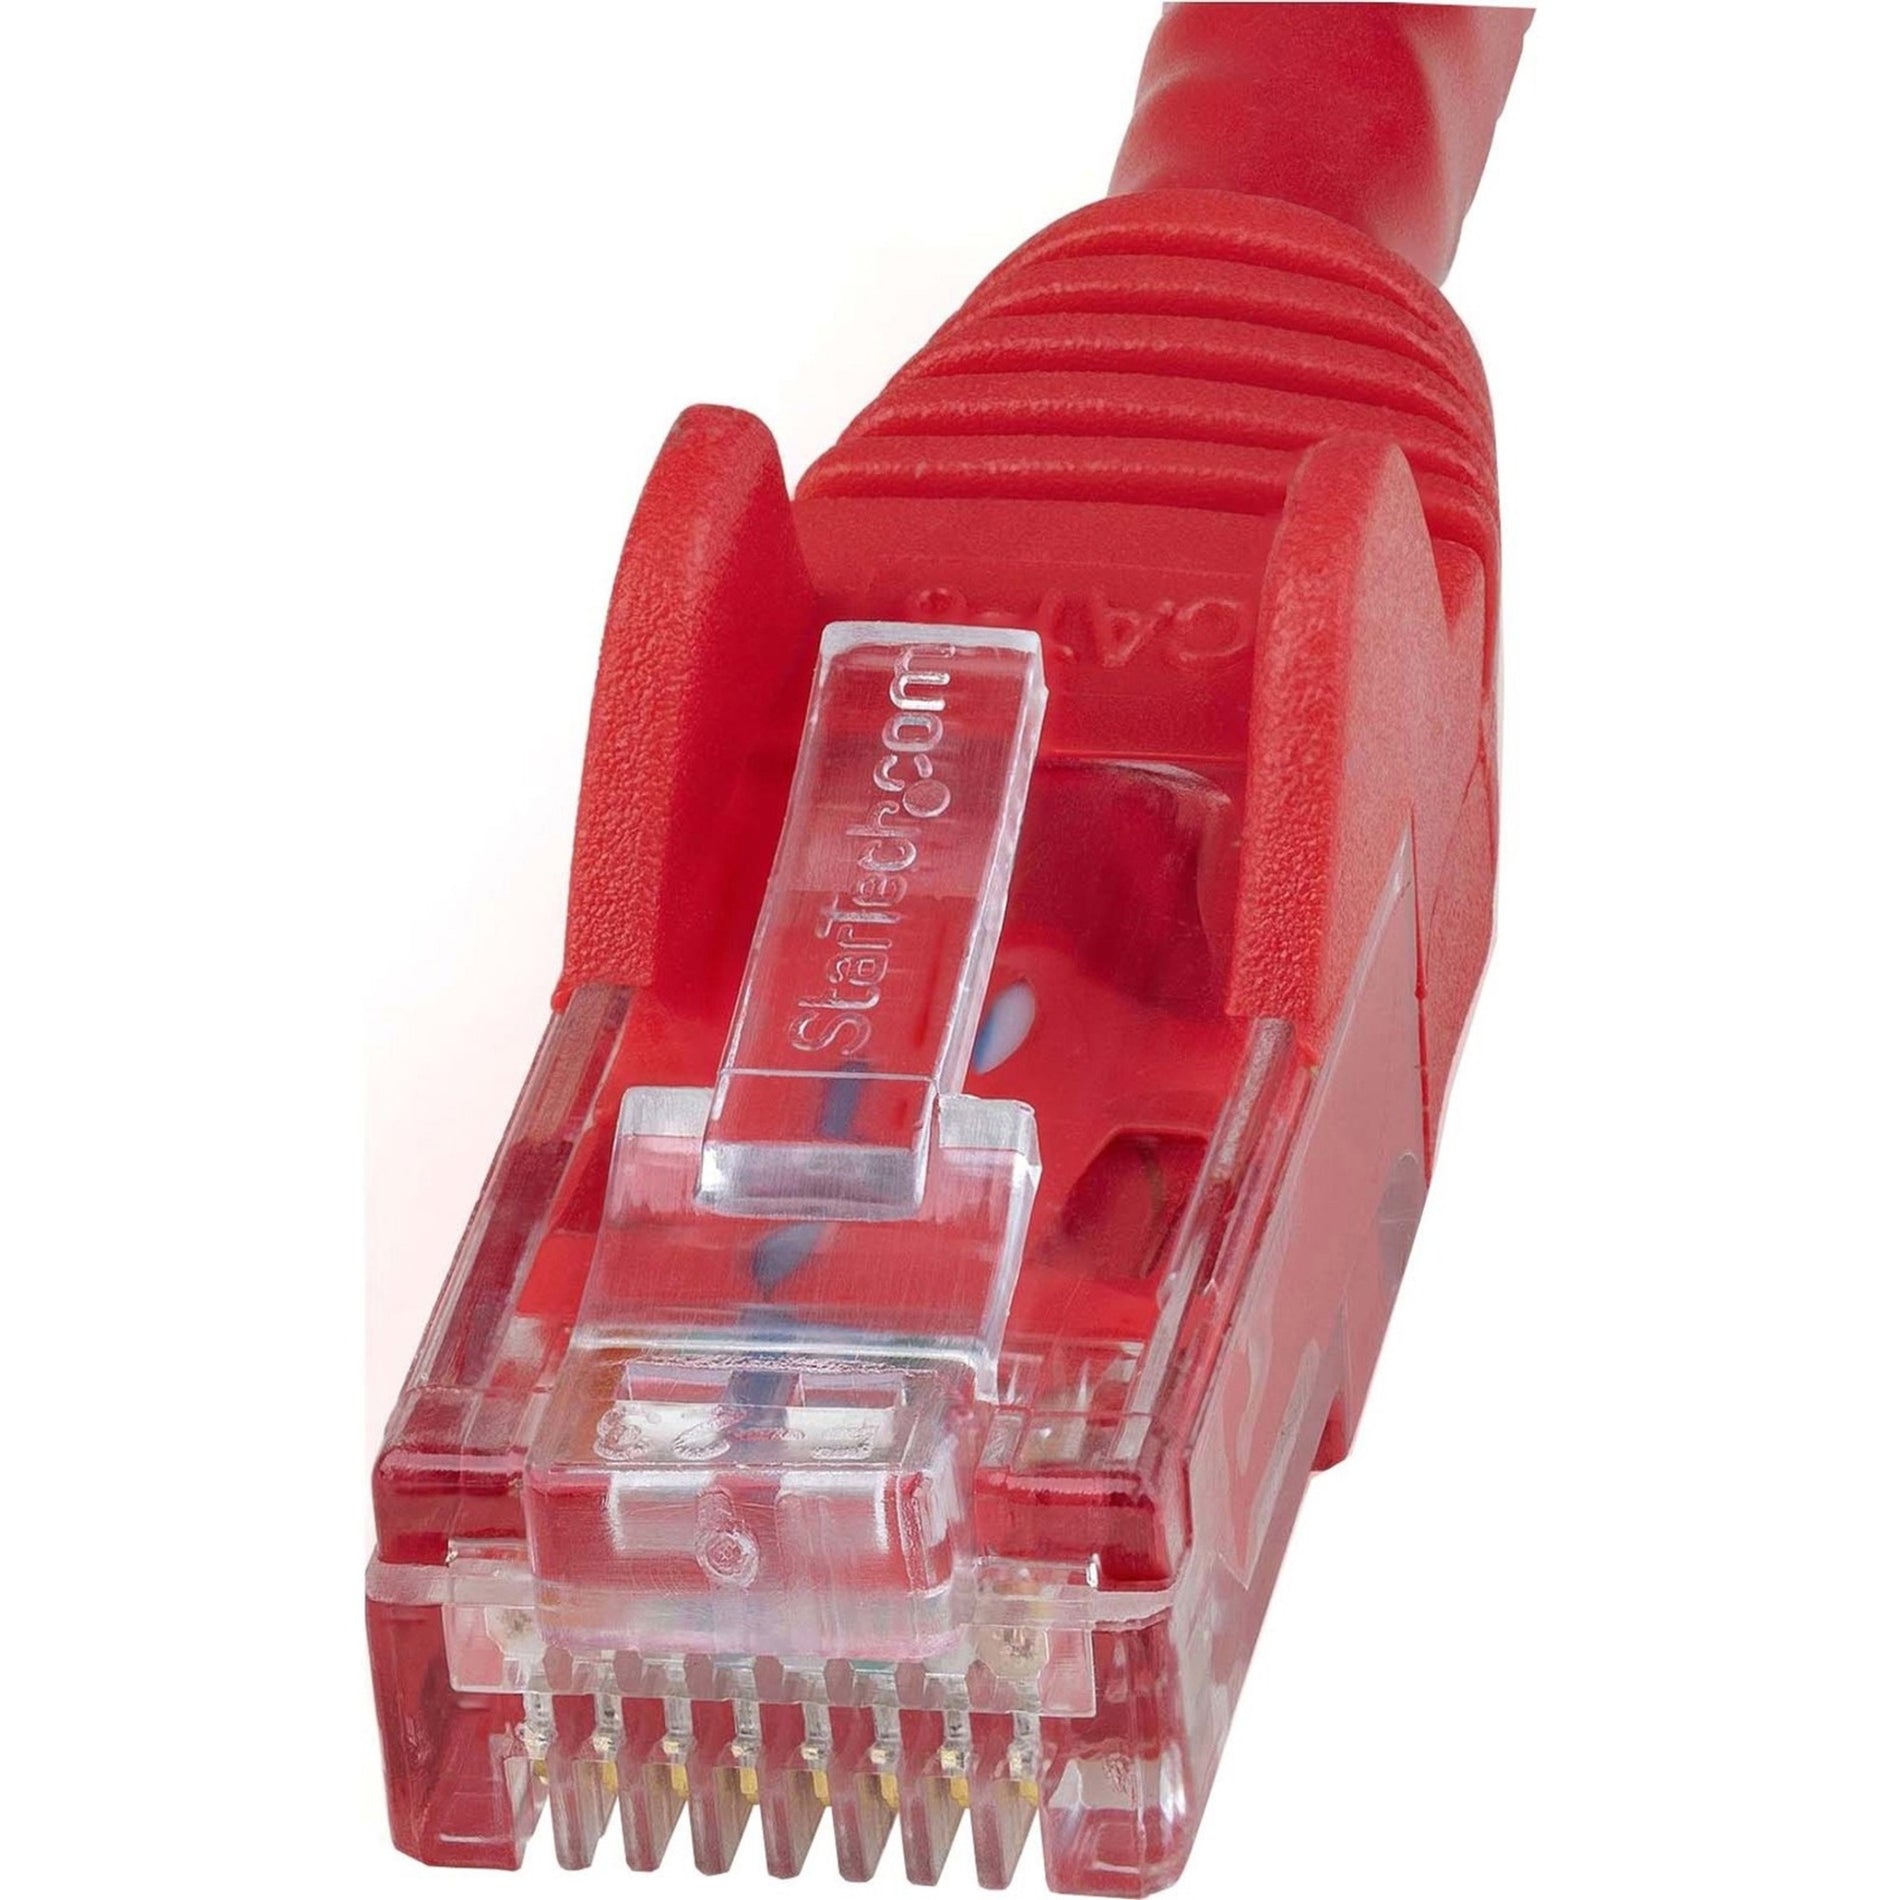 StarTech.com N6PATCH5RD Cat6 Patch Cable, 5ft Red Ethernet Cable, Snagless RJ45 Connectors